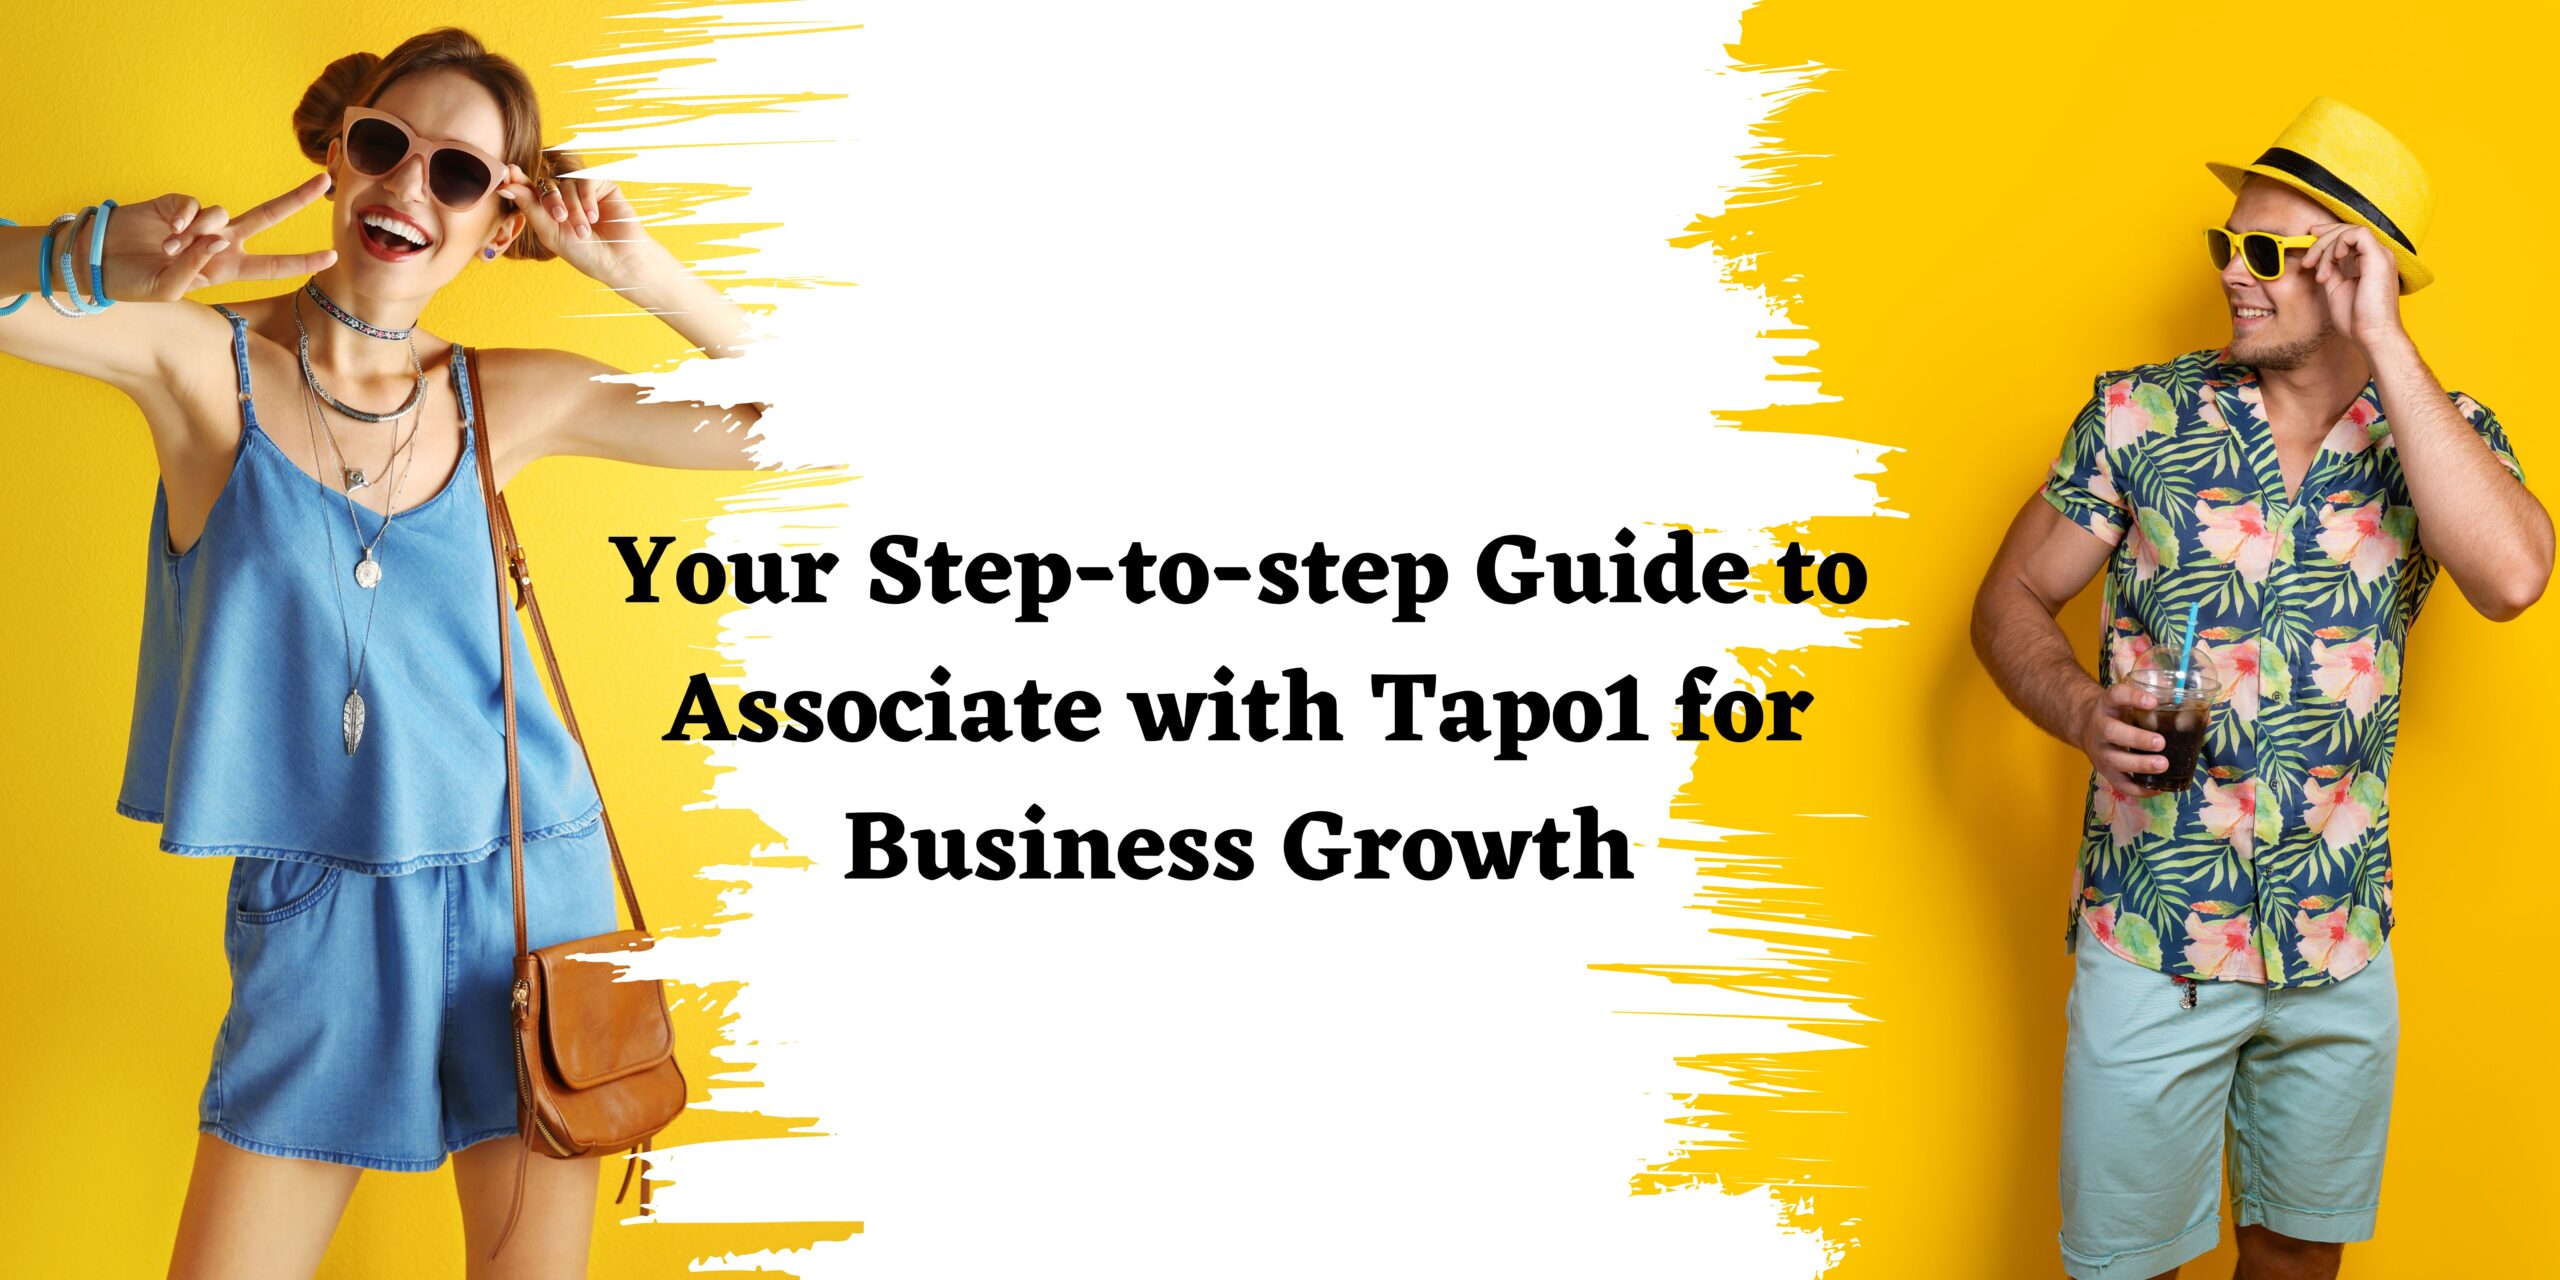 Your Step-to-step Guide to Associate with Tapo1 for Business Growth